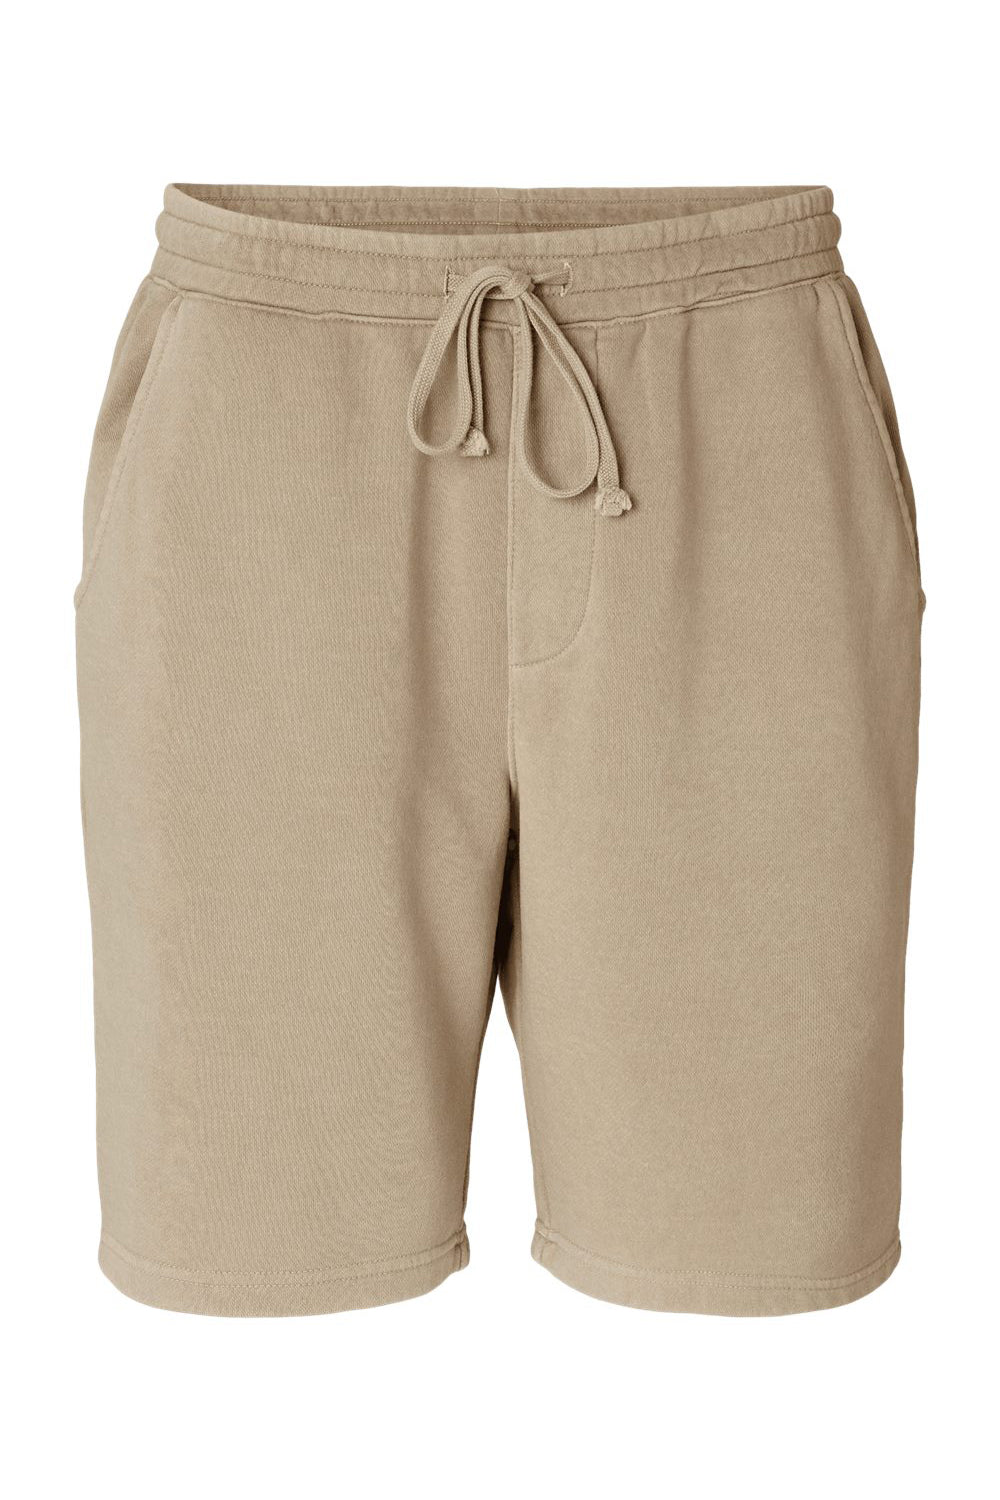 Independent Trading Co. PRM50STPD Mens Pigment Dyed Fleece Shorts w/ Pockets Sandstone Brown Flat Front